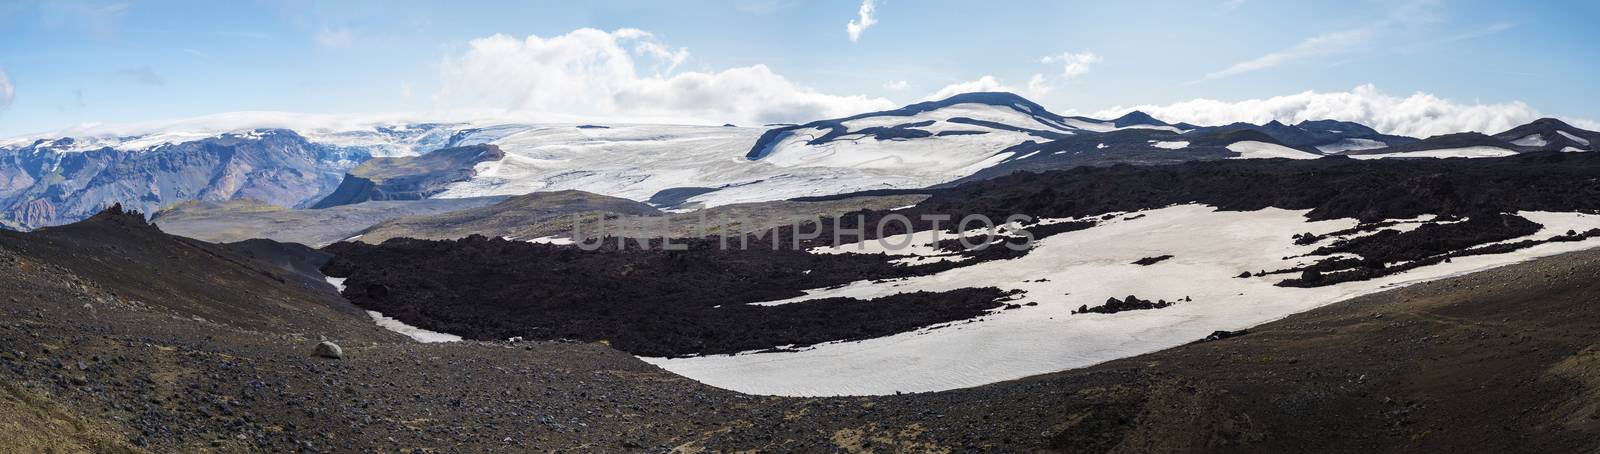 Panoramic view on Red and black volcanic Iceland landscape at Fimmvorduhals hiking trail with glacier volcano lava field, snow and magni and mudi hill, createed by eruption of Eyjafjallajokull in 2010 which affected air traffic in the whole Europe. Summer blue sky.